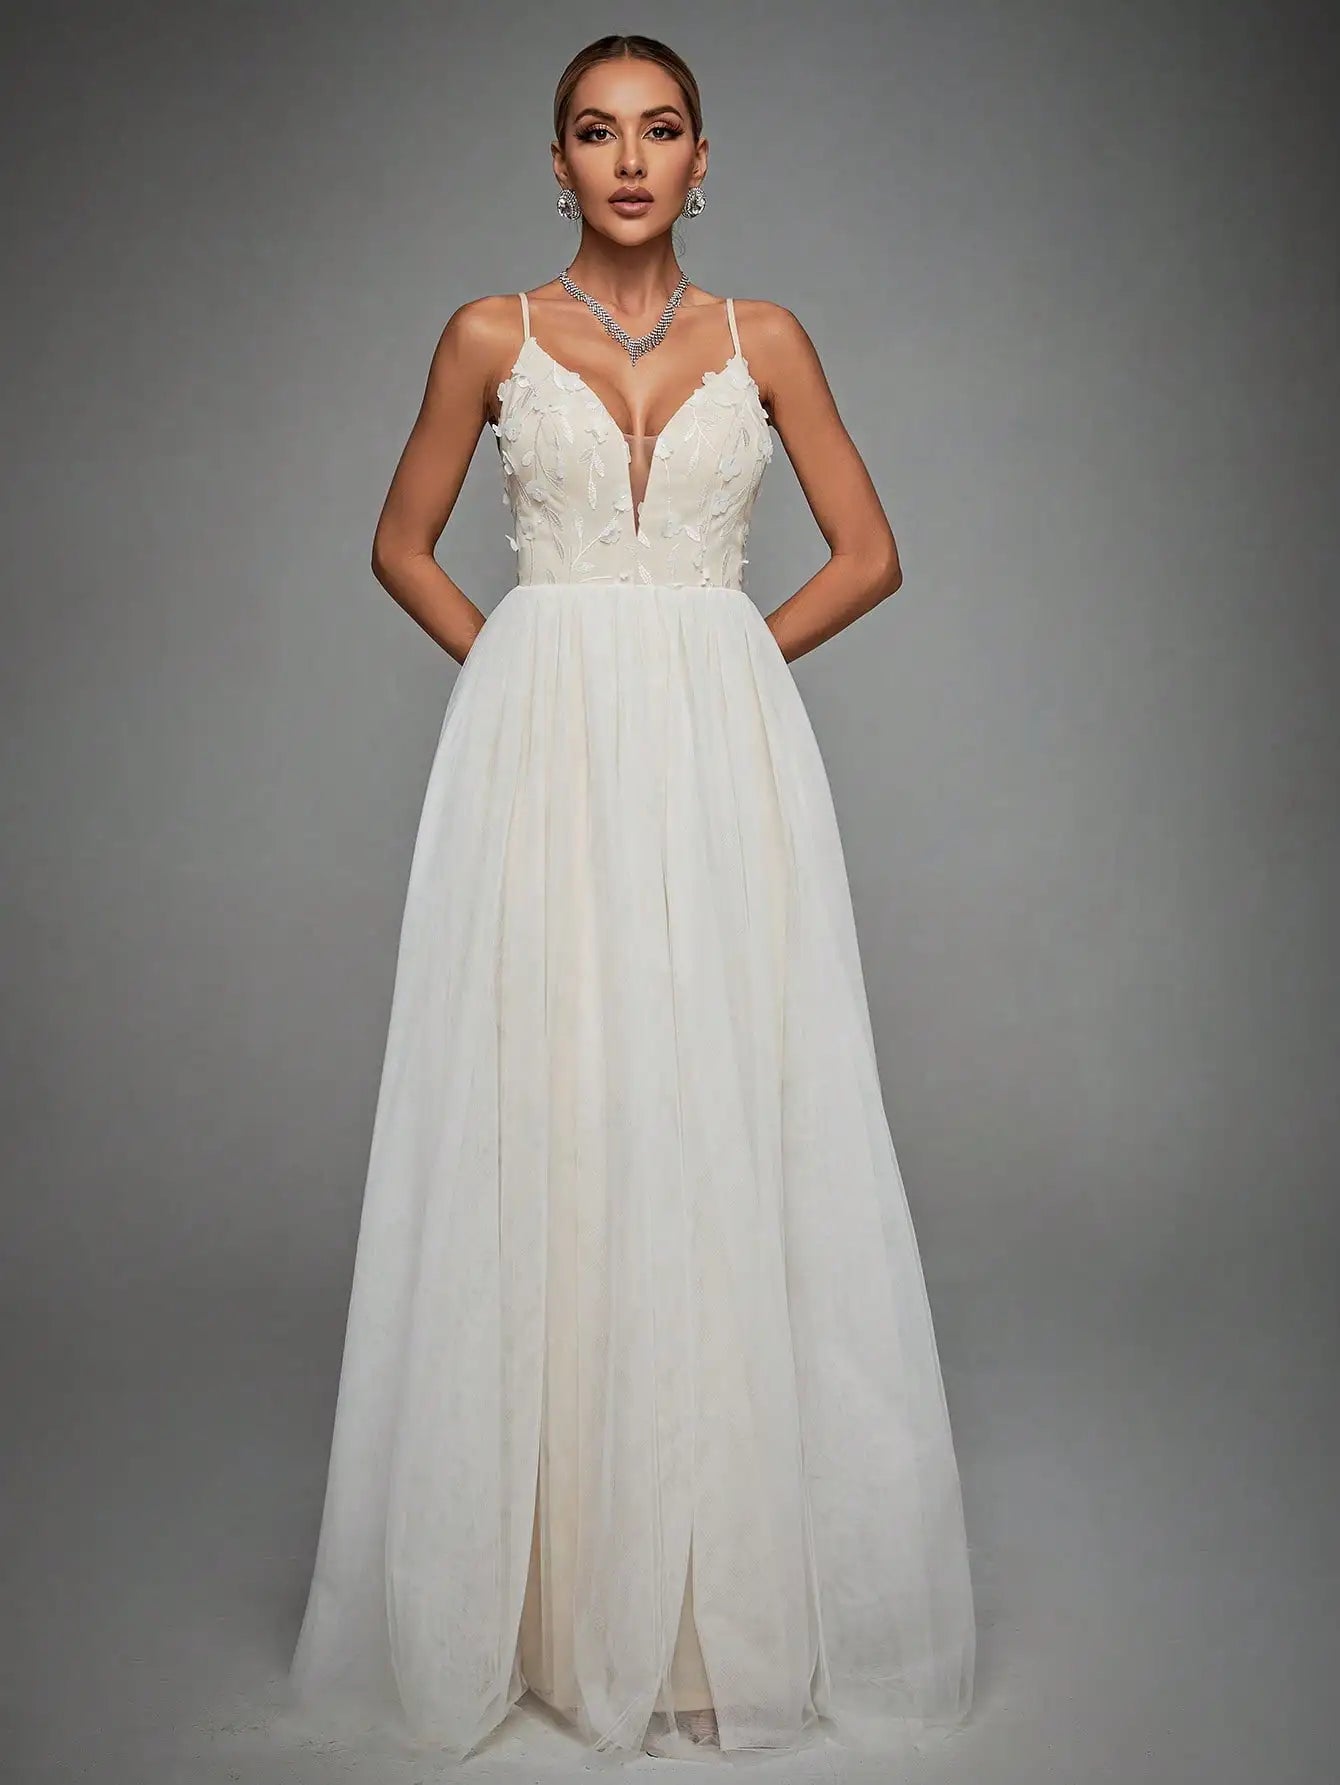 Mgiacy Halter V-neck three-dimensional embroidery color contrast wedding dress long evening gown ball dress party dress